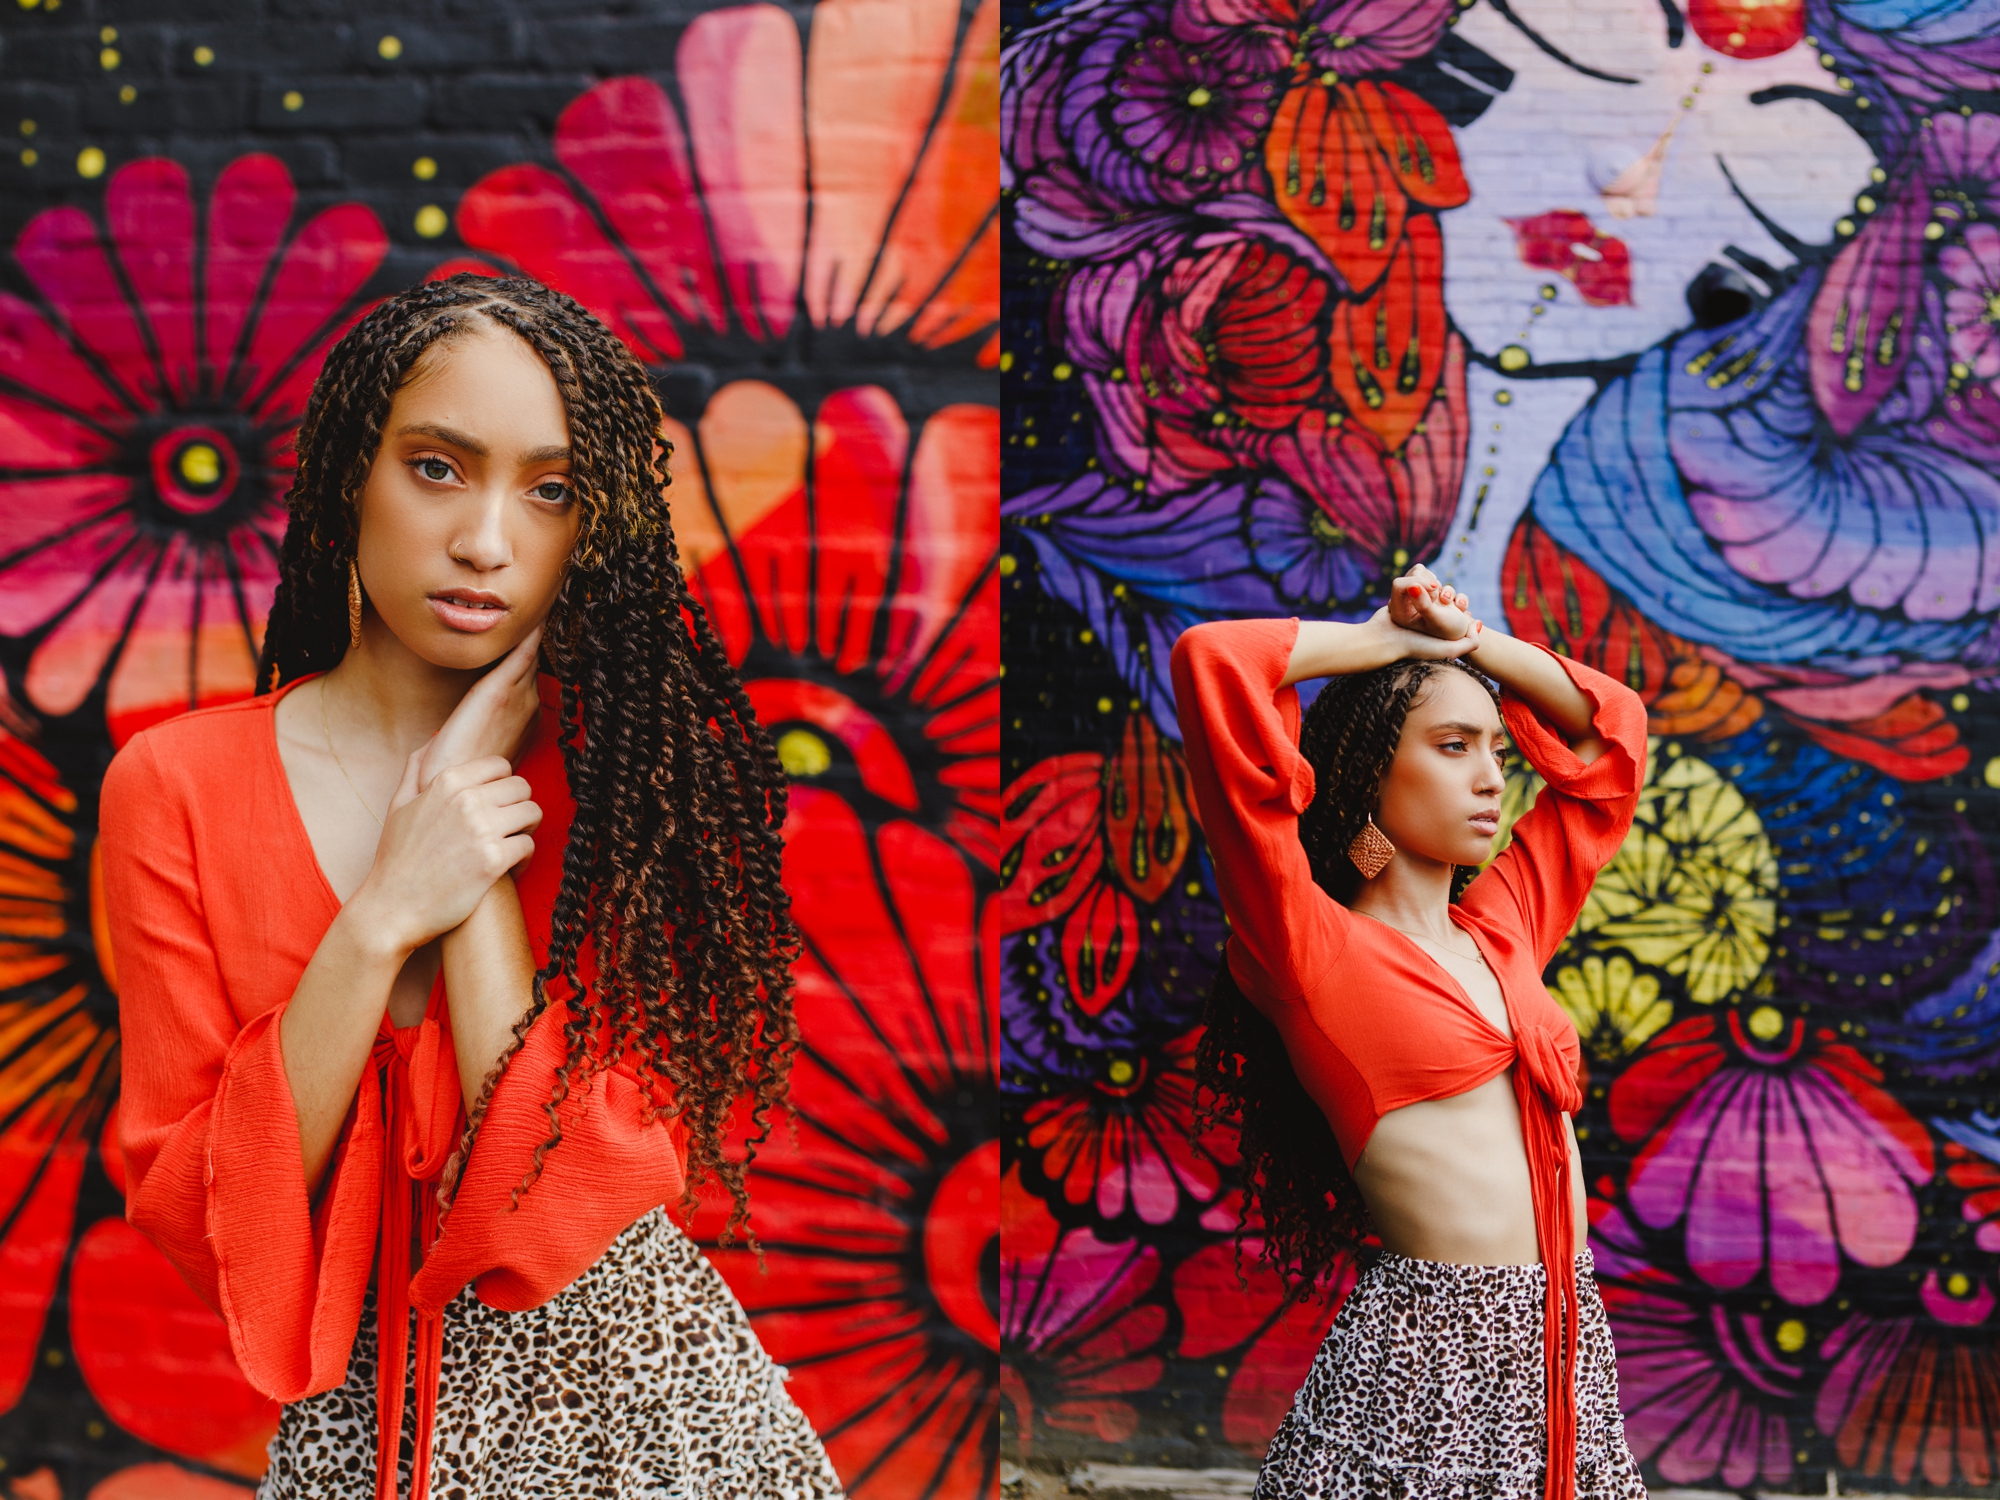 Alize wears a red long sleeve tied crop top and short cheetah print skirt posing in front of a jewel toned floral mural